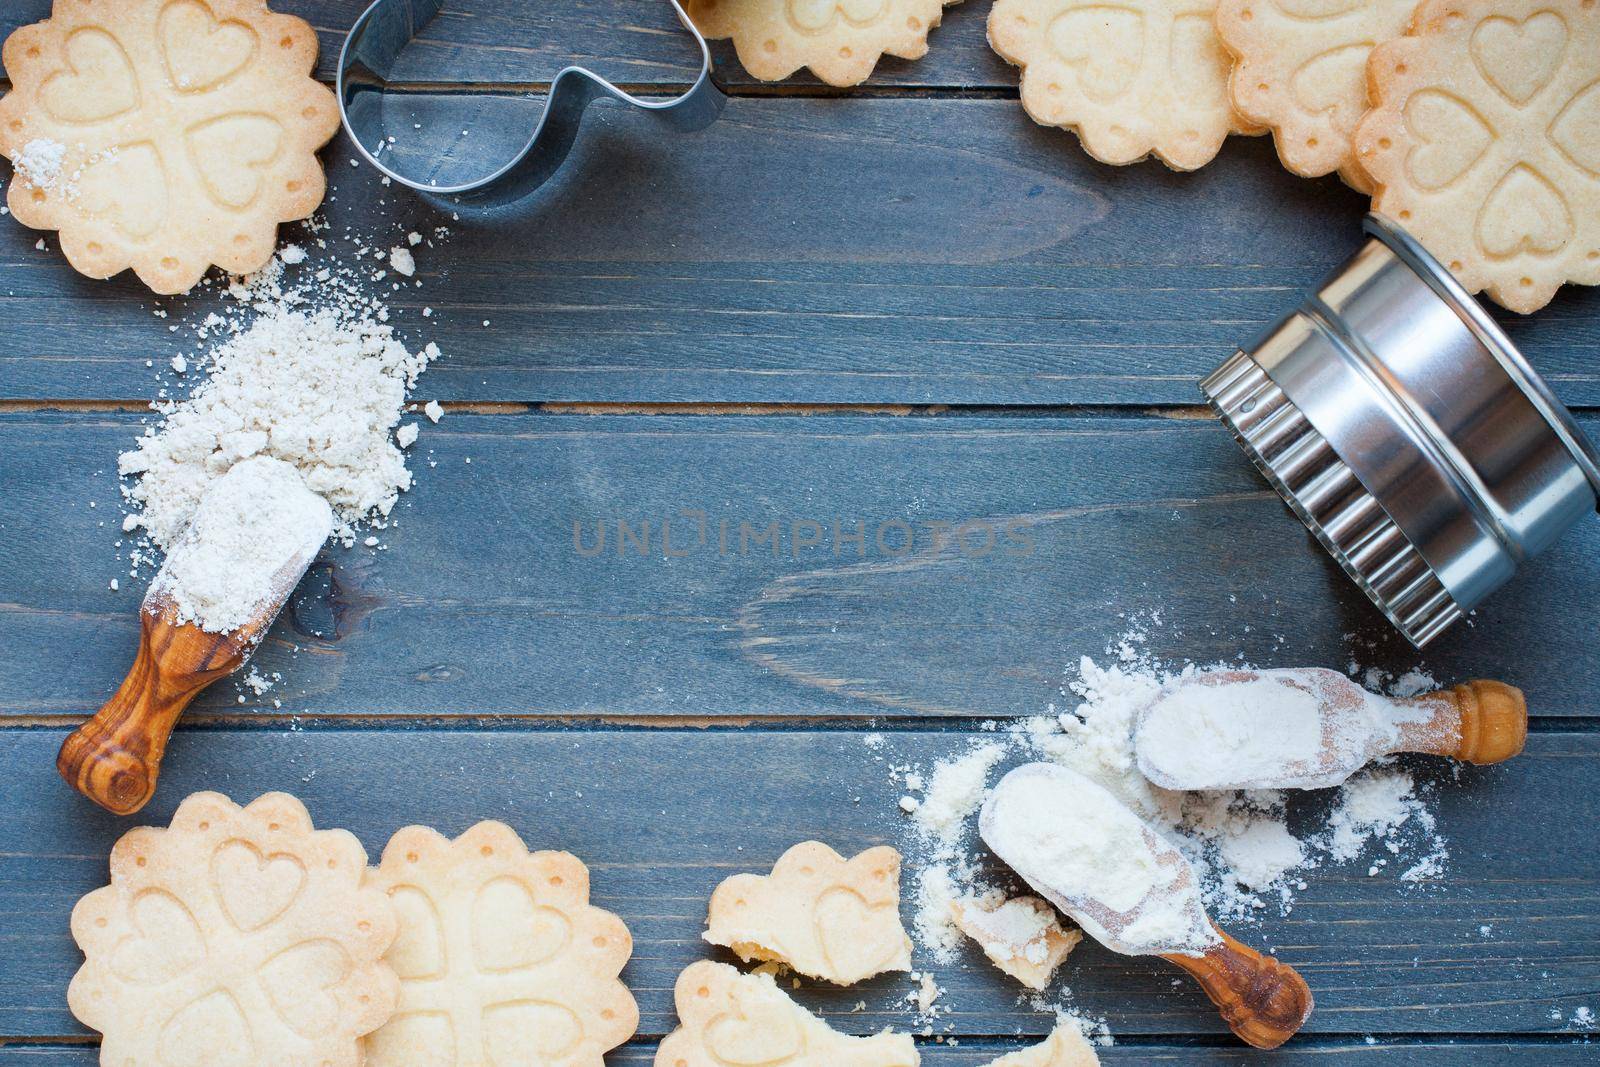 Background of baking gluten free shortbread cookies with utensils and ingredients, viewed from above